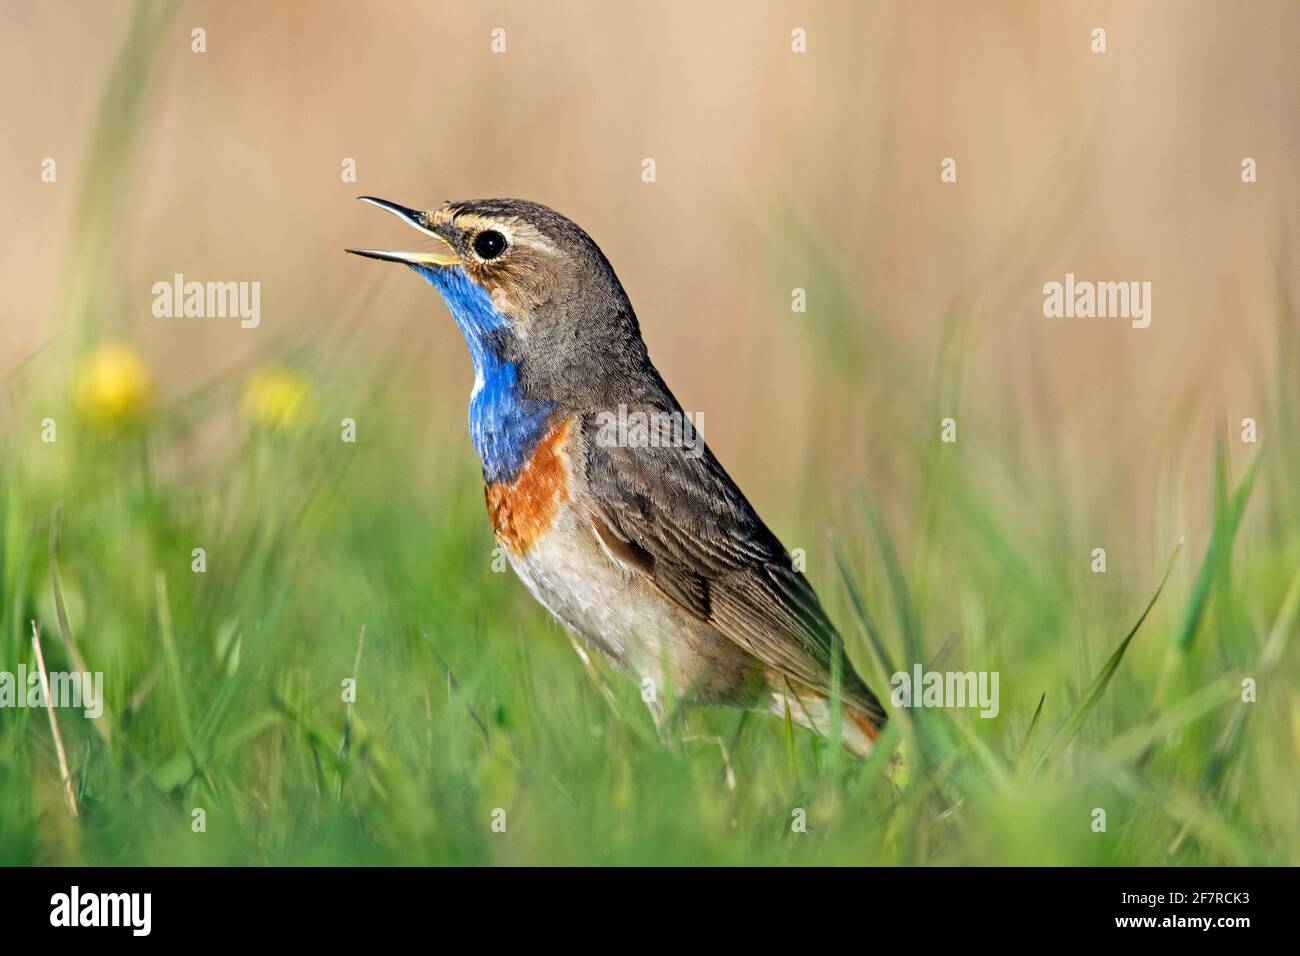 White-spotted bluethroat (Luscinia svecica cyanecula) male calling / singing in grassland in spring Stock Photo